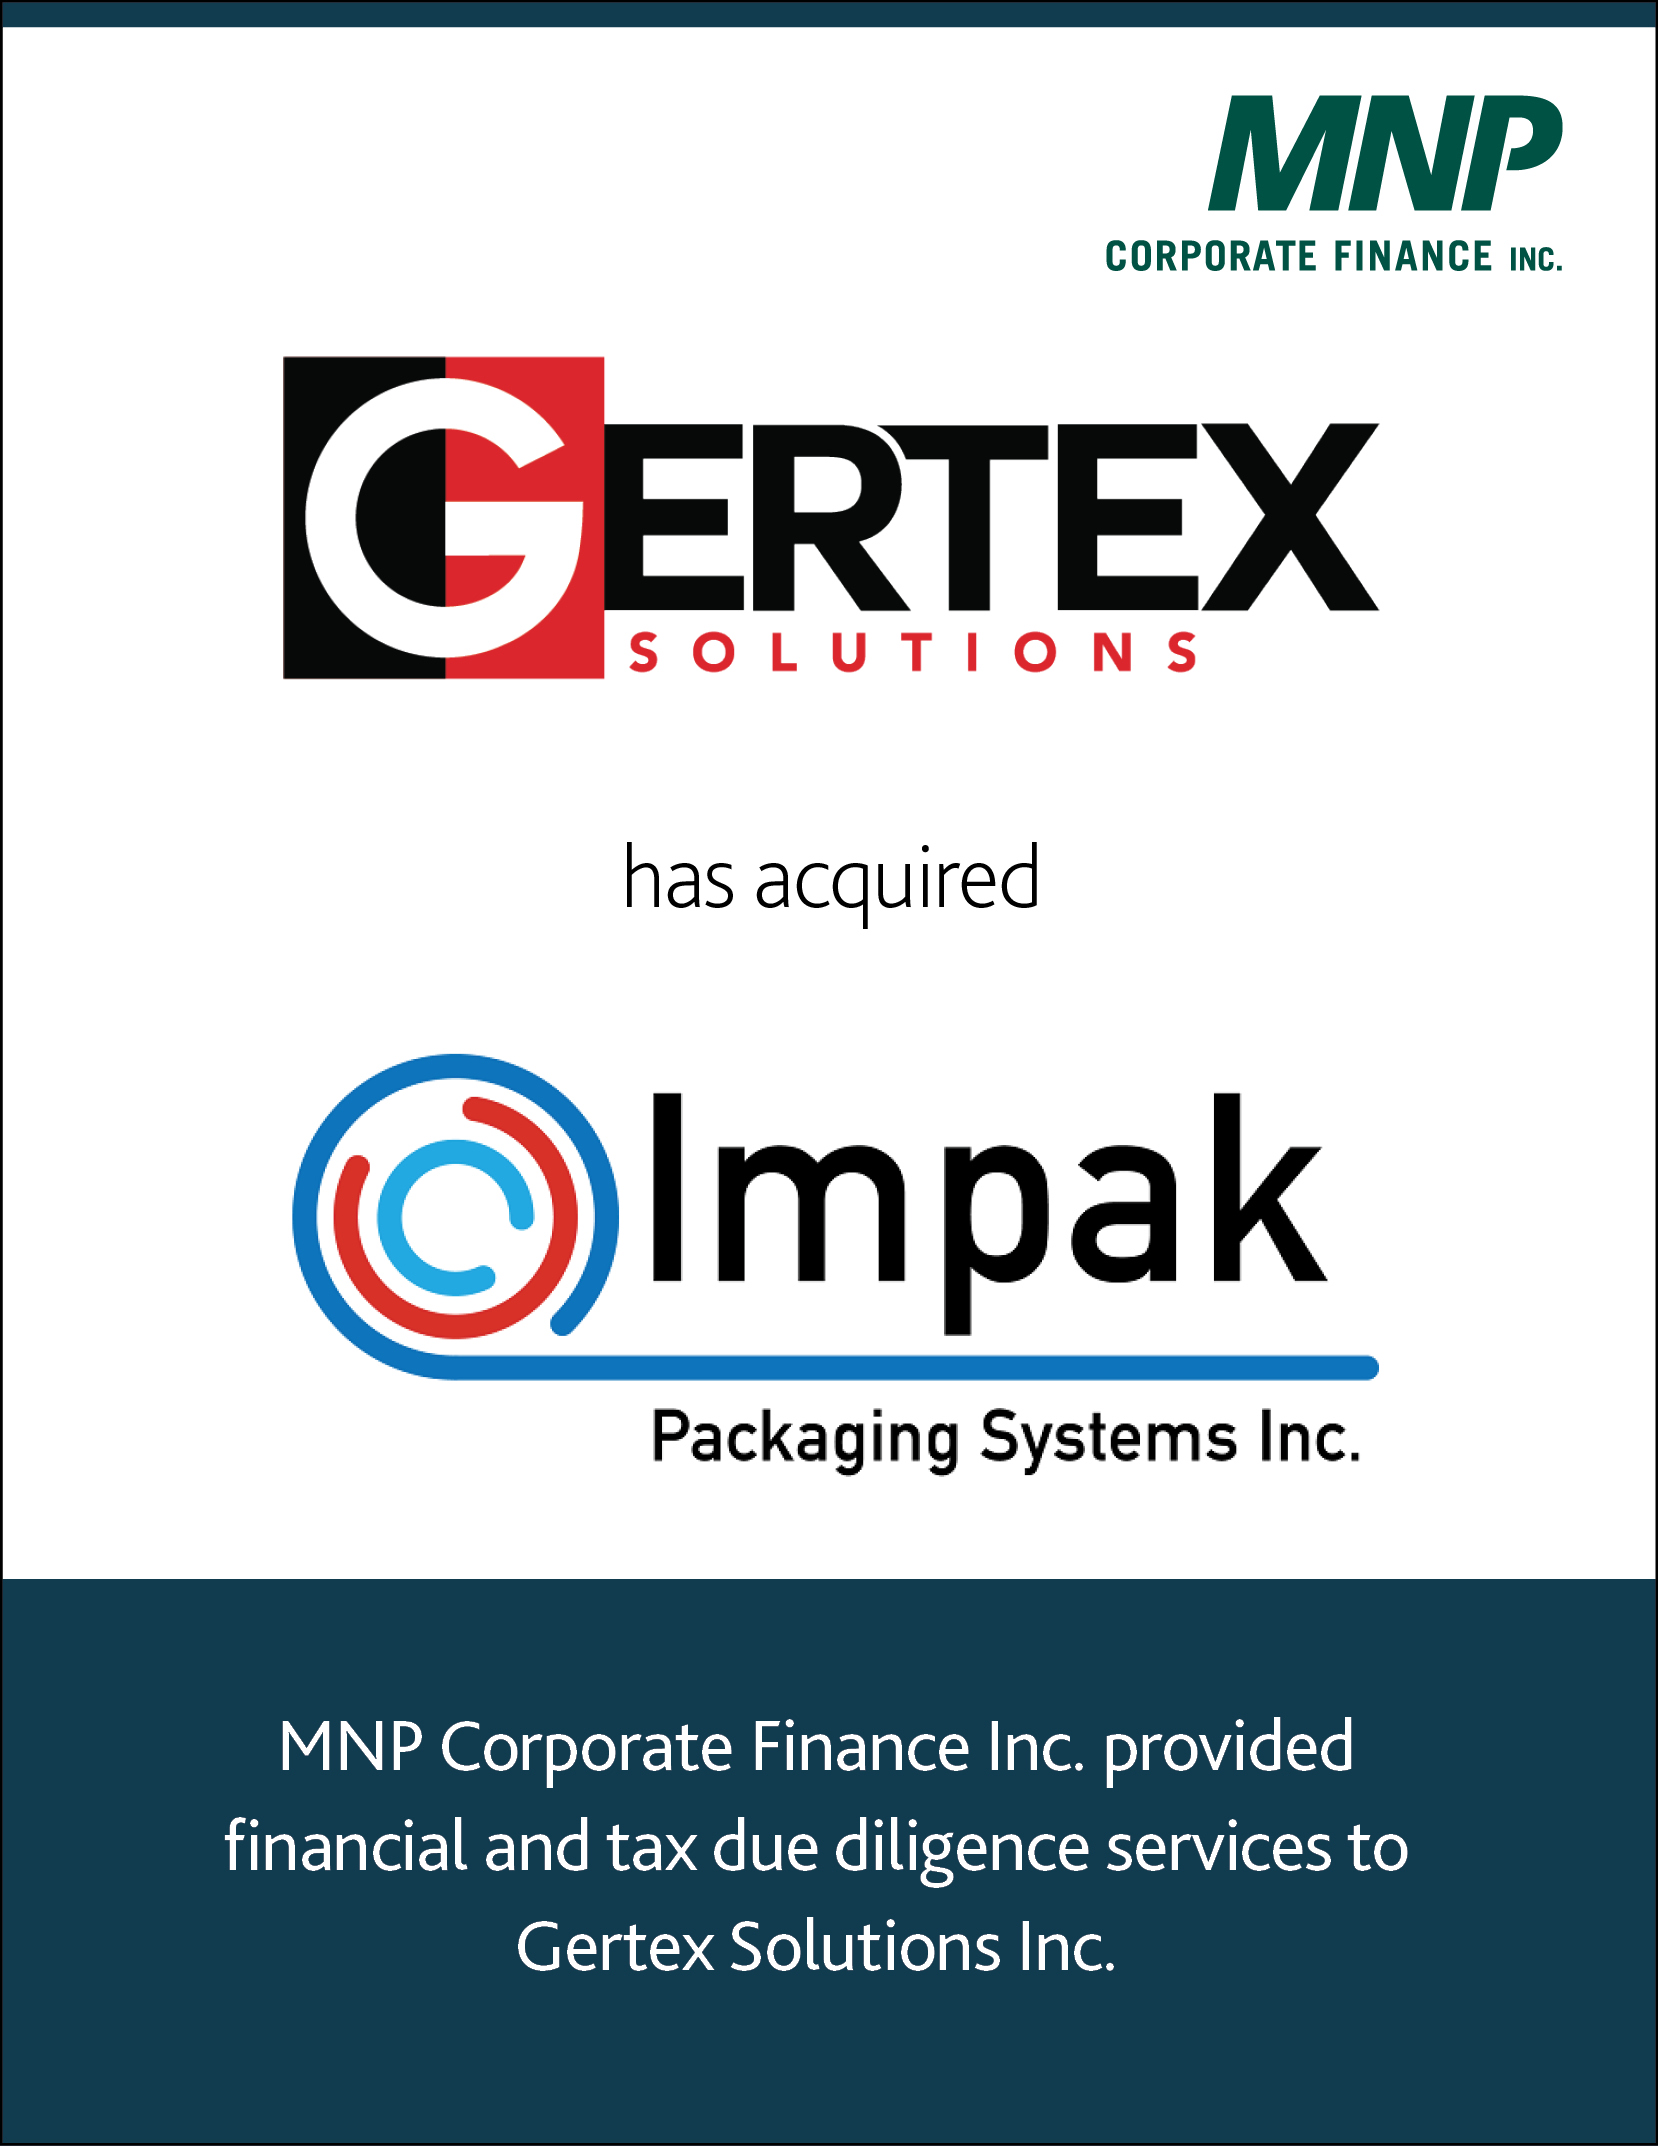 Gertex Solutions has acquired Impak Packaging Systems Inc